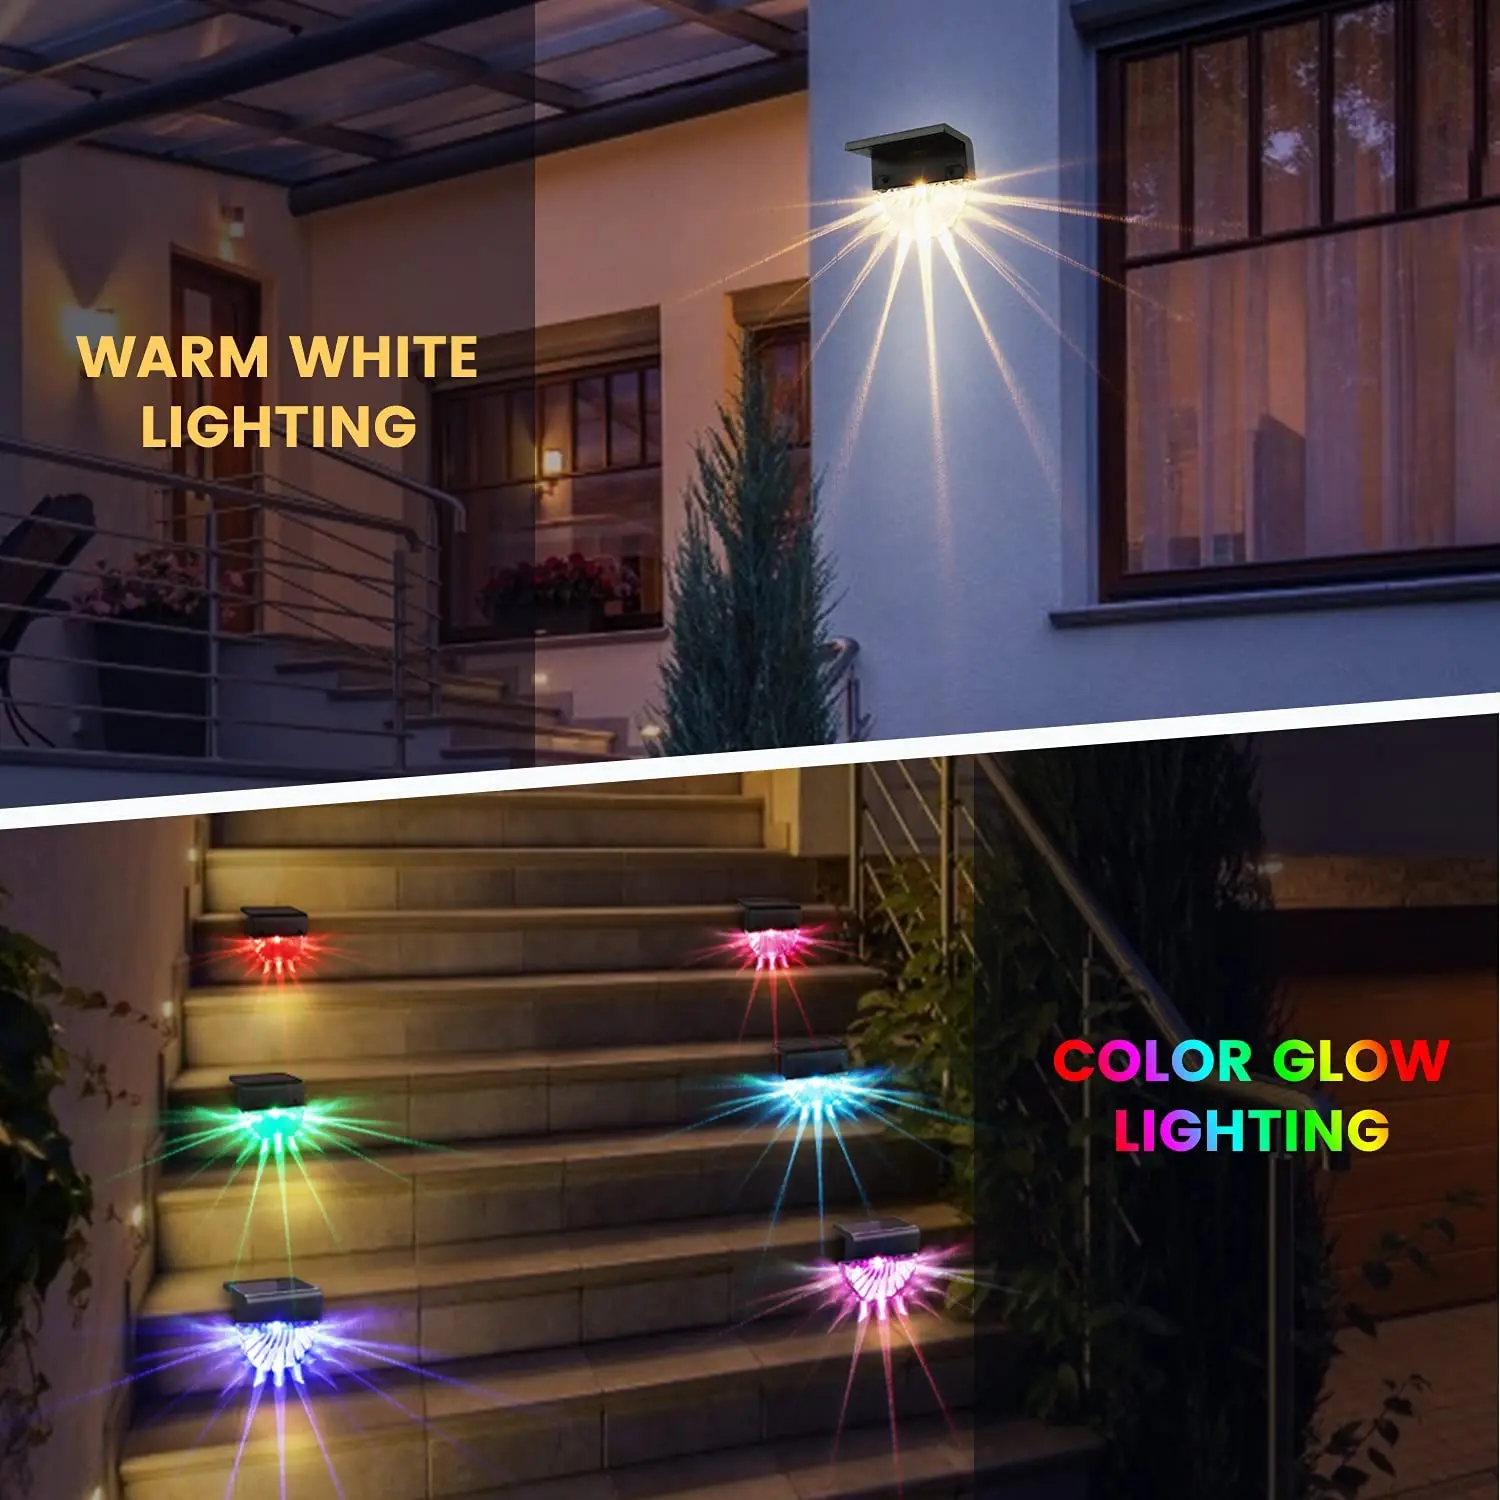 

Solar Deck Lights for Patio, Stairs,Yard, Garden Pathway, Step and Fences, 10 Lumens, Warm White/Color Changing Lighting